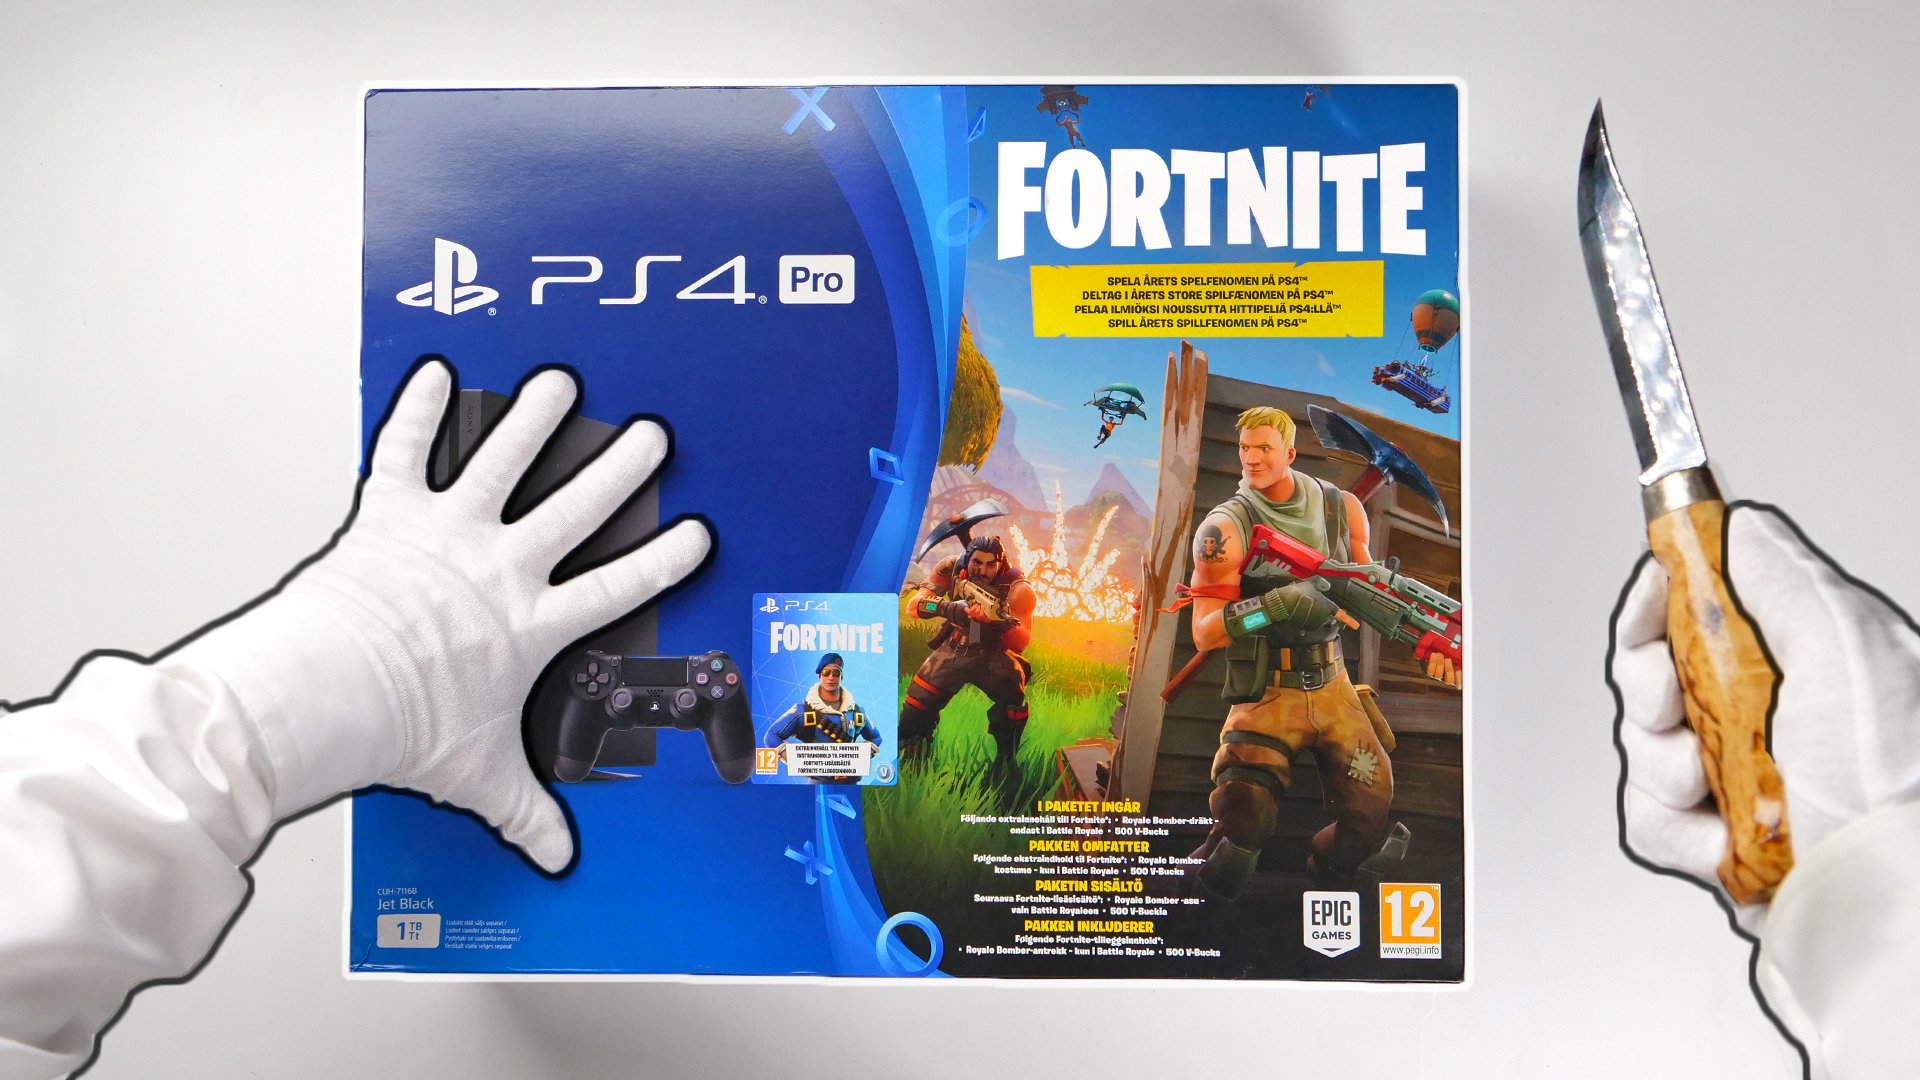 TheRelaxingEnd on Twitter: "PS4 "Fortnite" consoles unboxing (PS4 &amp; Slim). Comes with exclusive skin. https://t.co/YzJOXkkMBG / Twitter